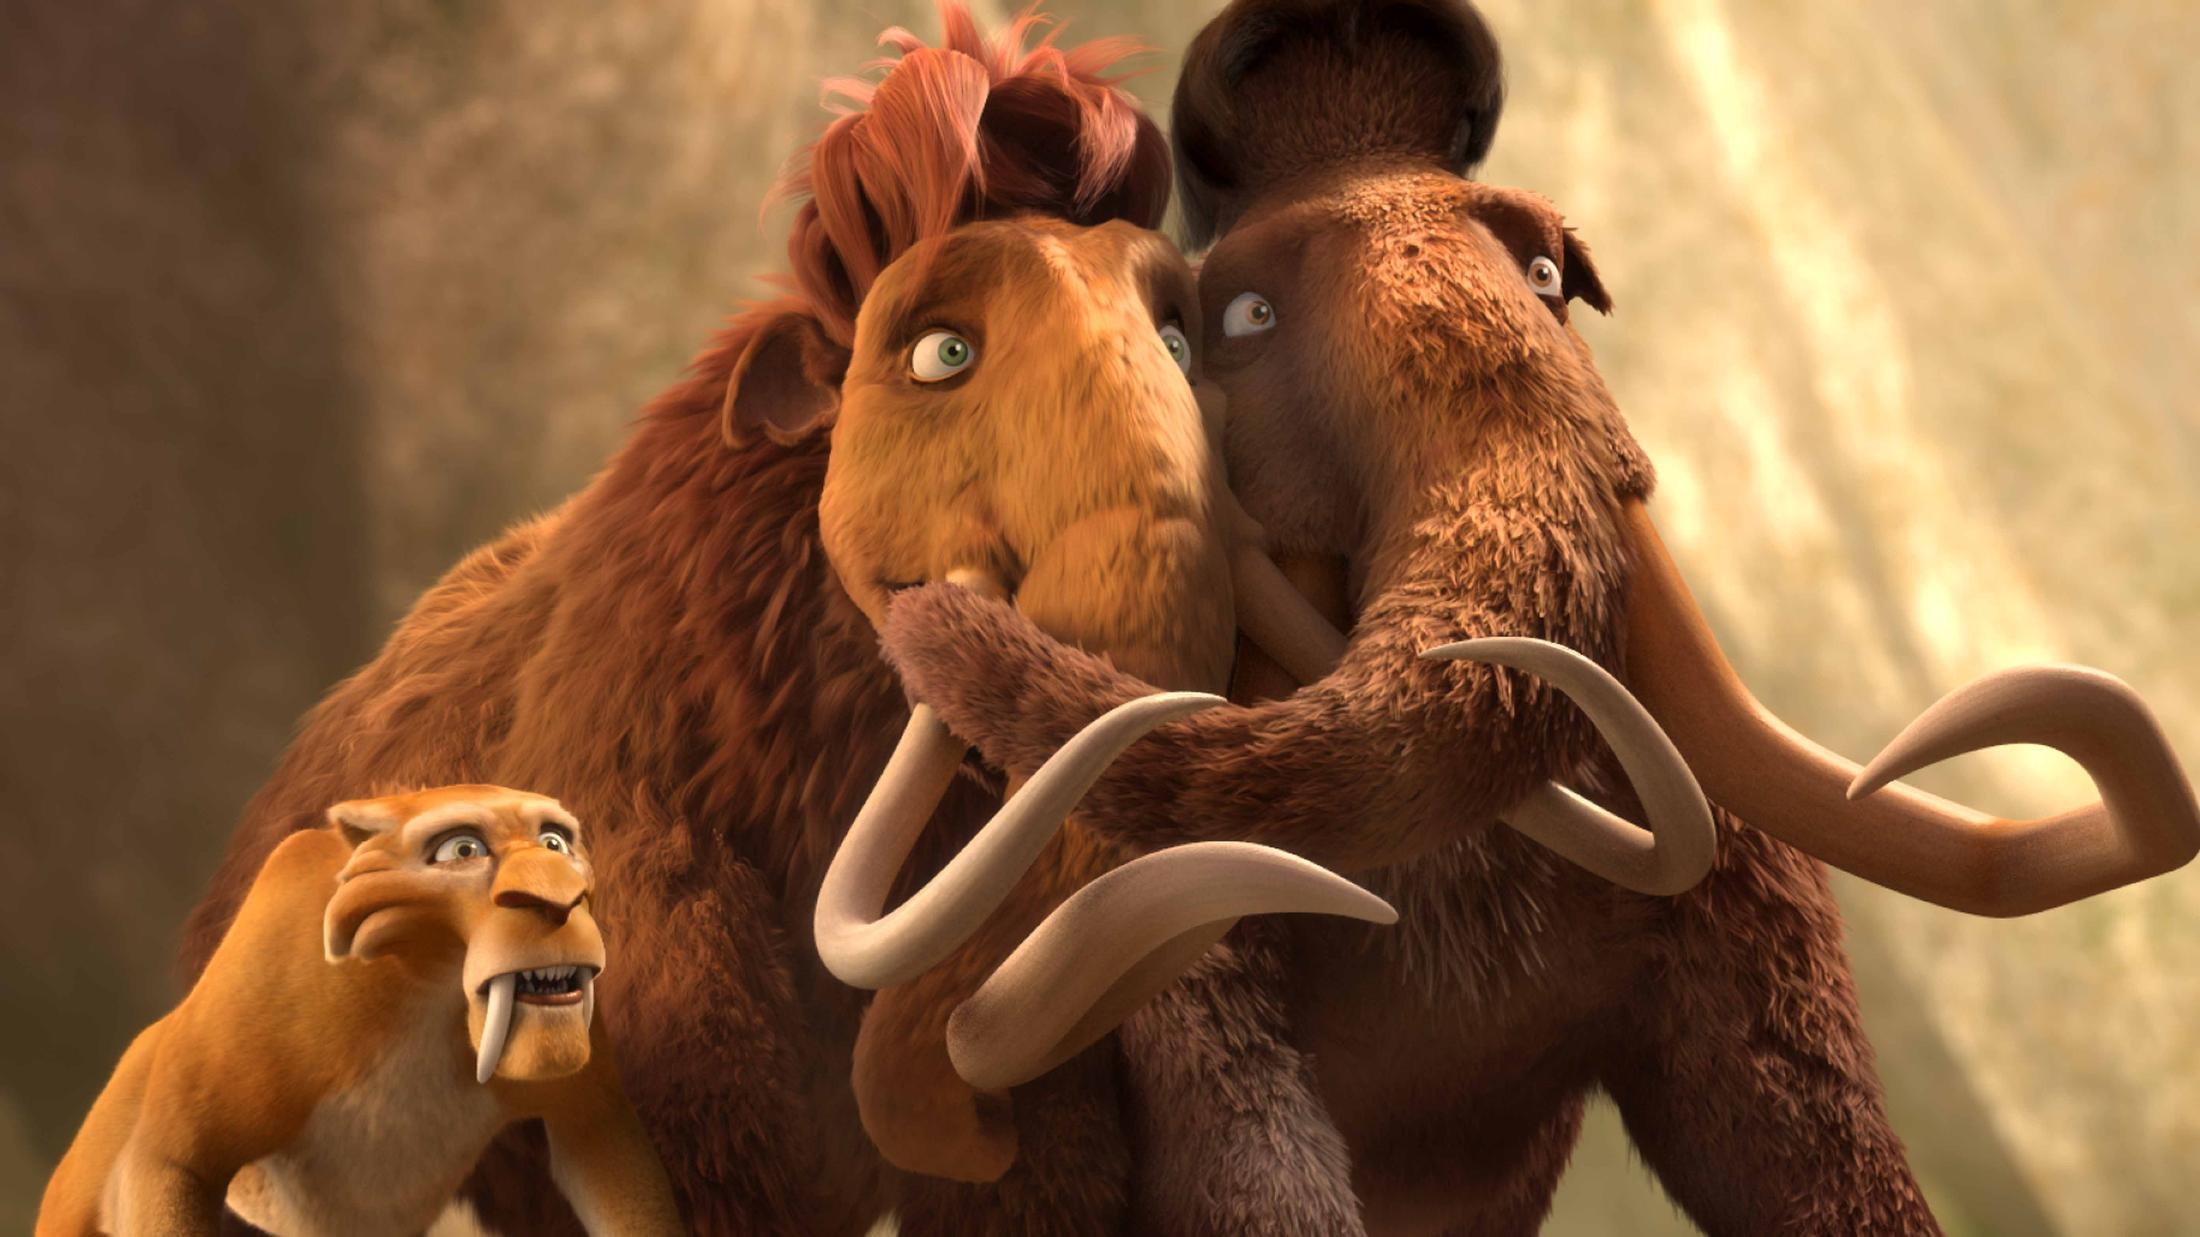 ice age 3 dawn of the dinosaurs wallpaper